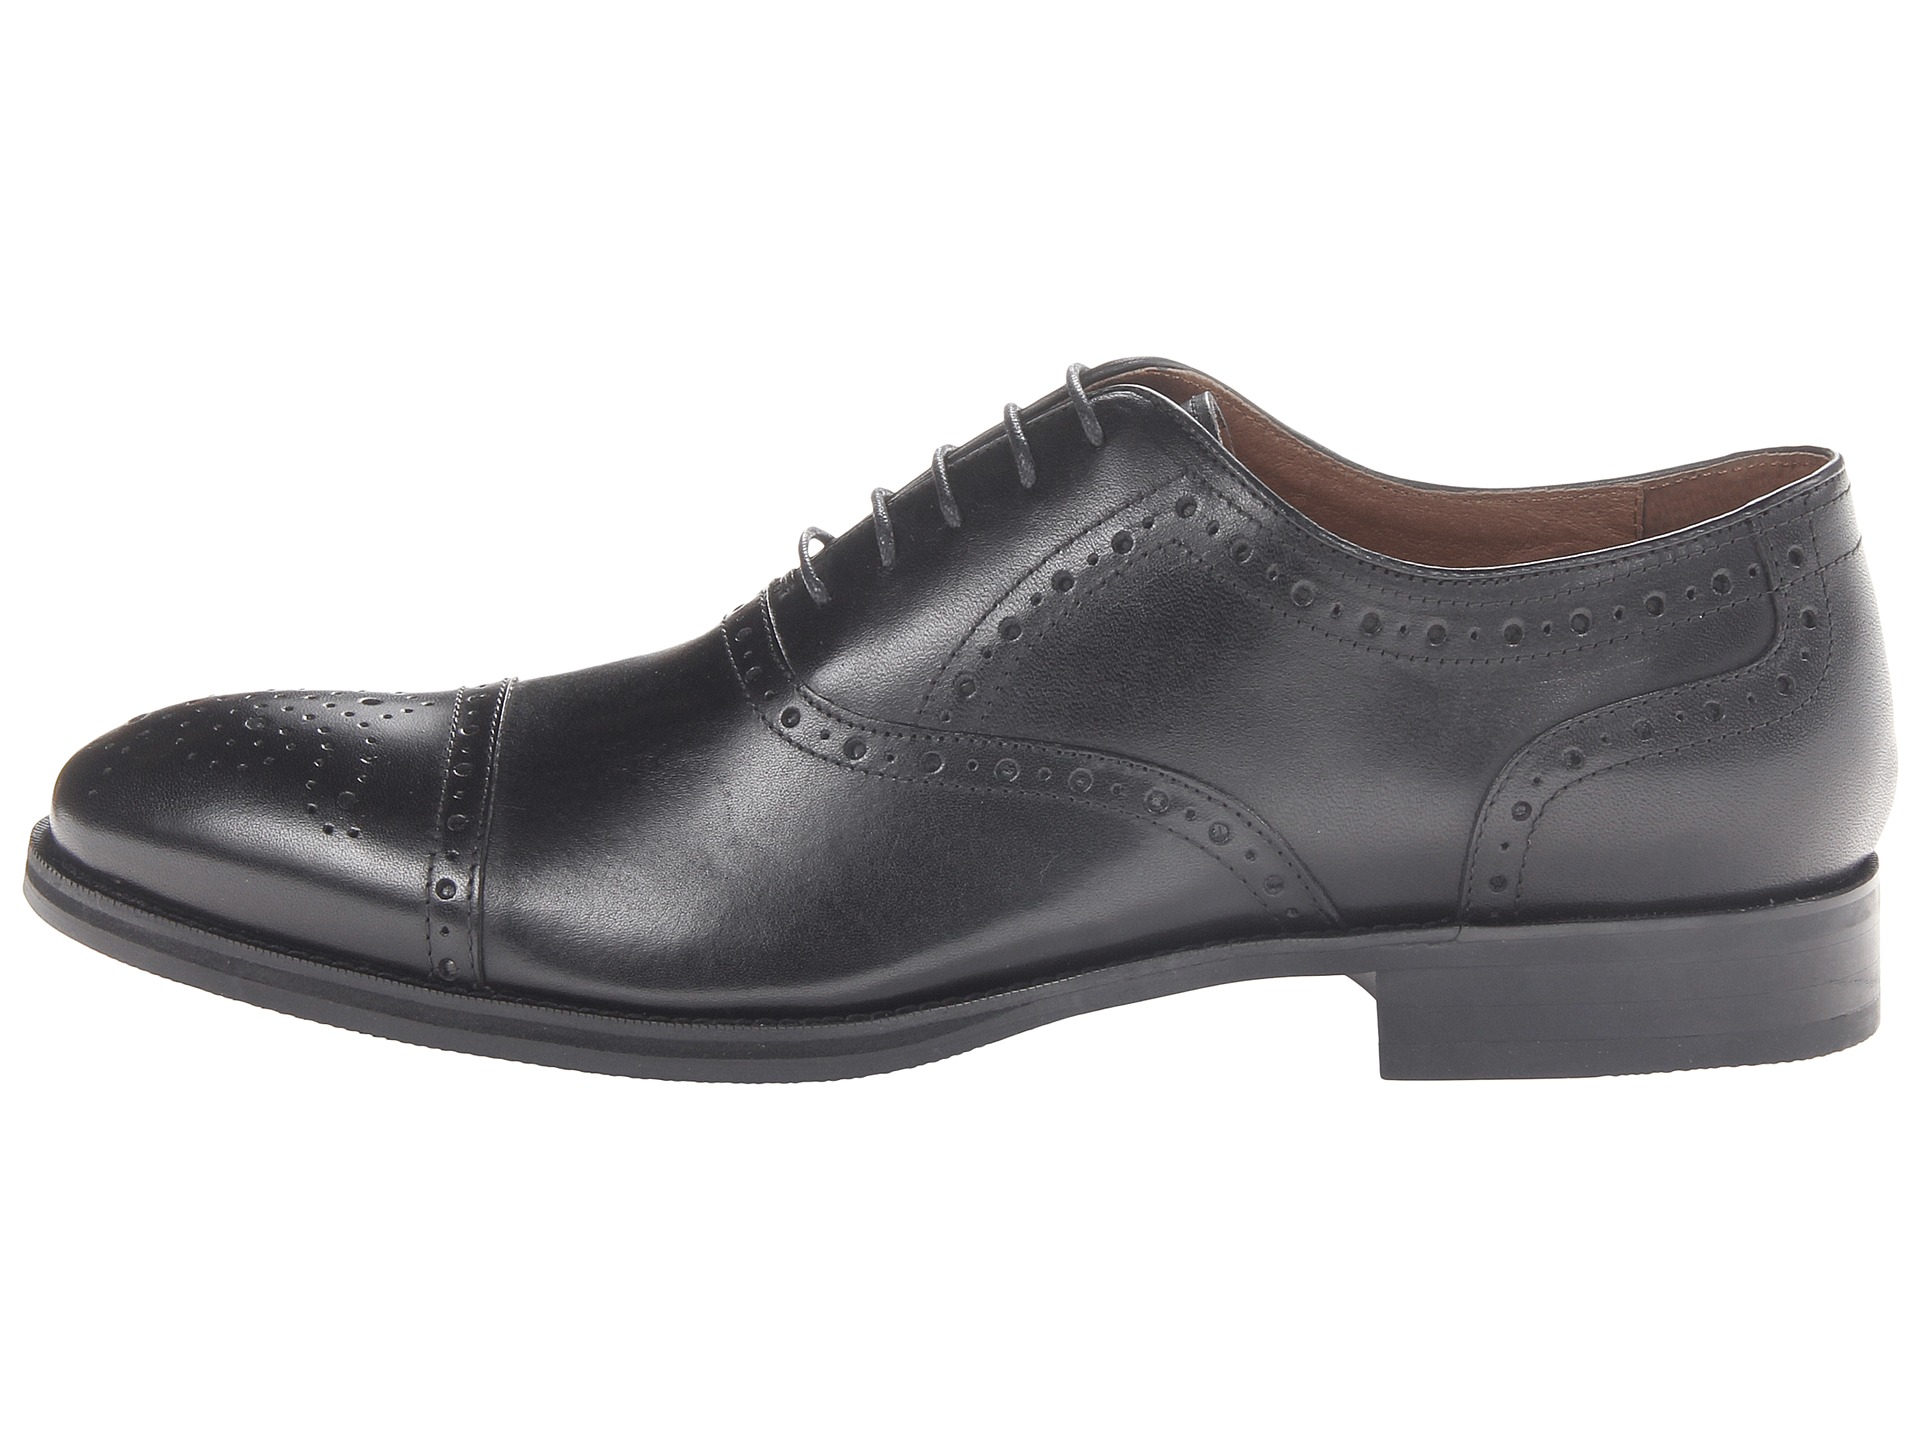 Johnston Murphy Tyndall Cap Toe, Shoes | Shipped Free at Zappos